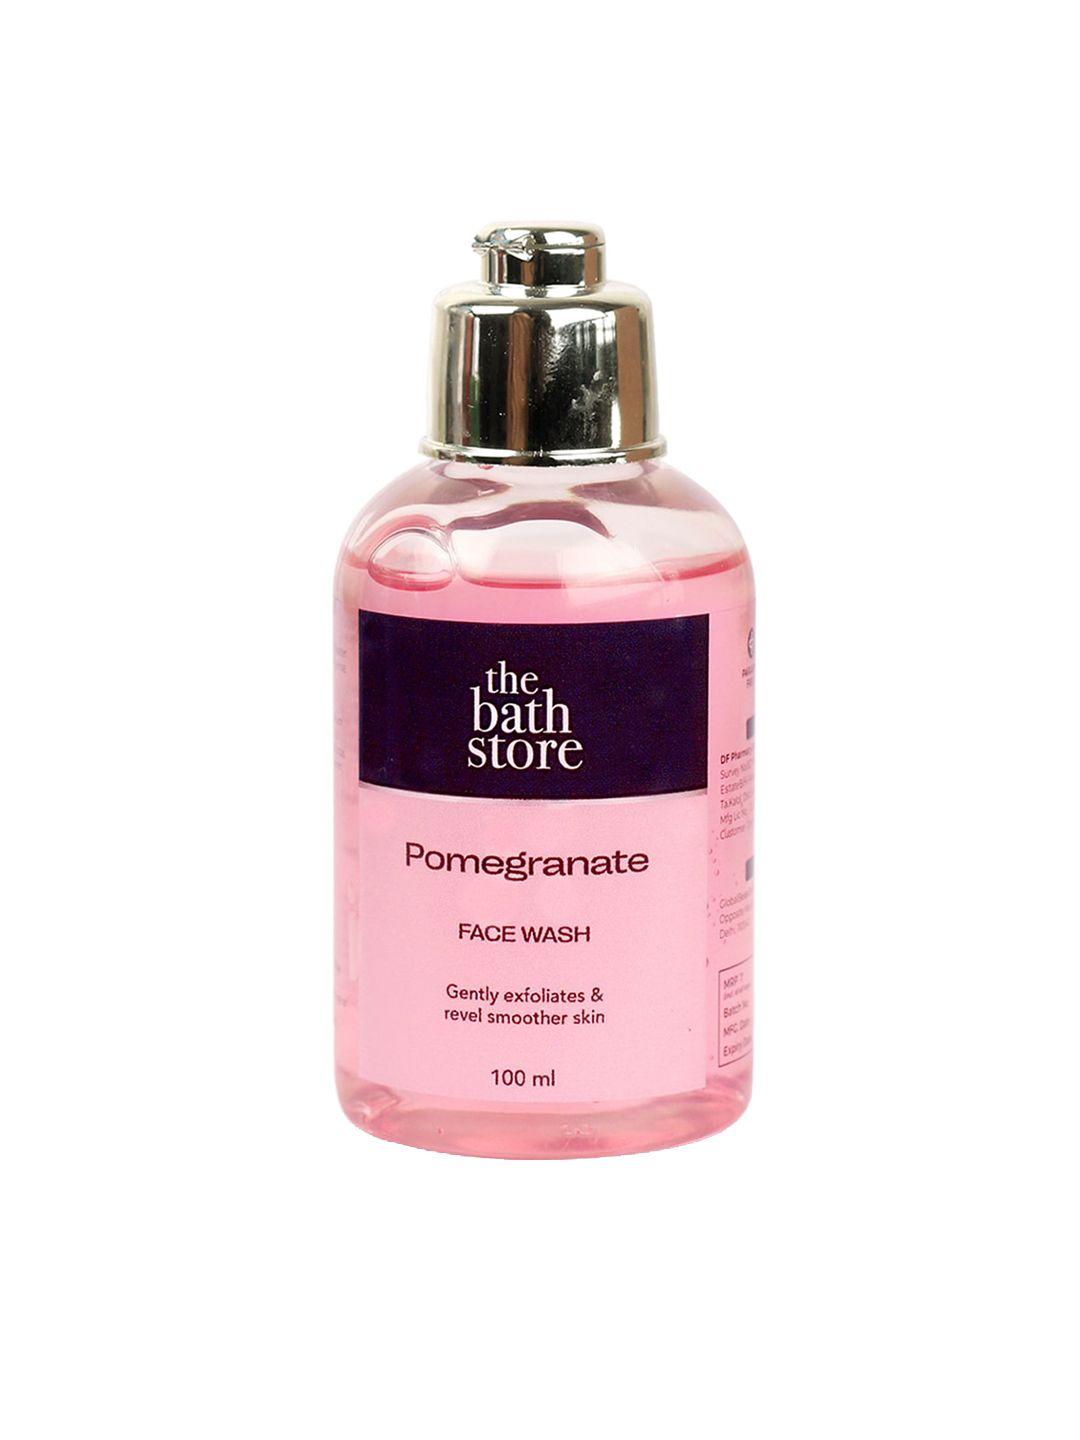 the bath store pomegranate face wash to gently exfoliates & revels smoother skin - 100 ml